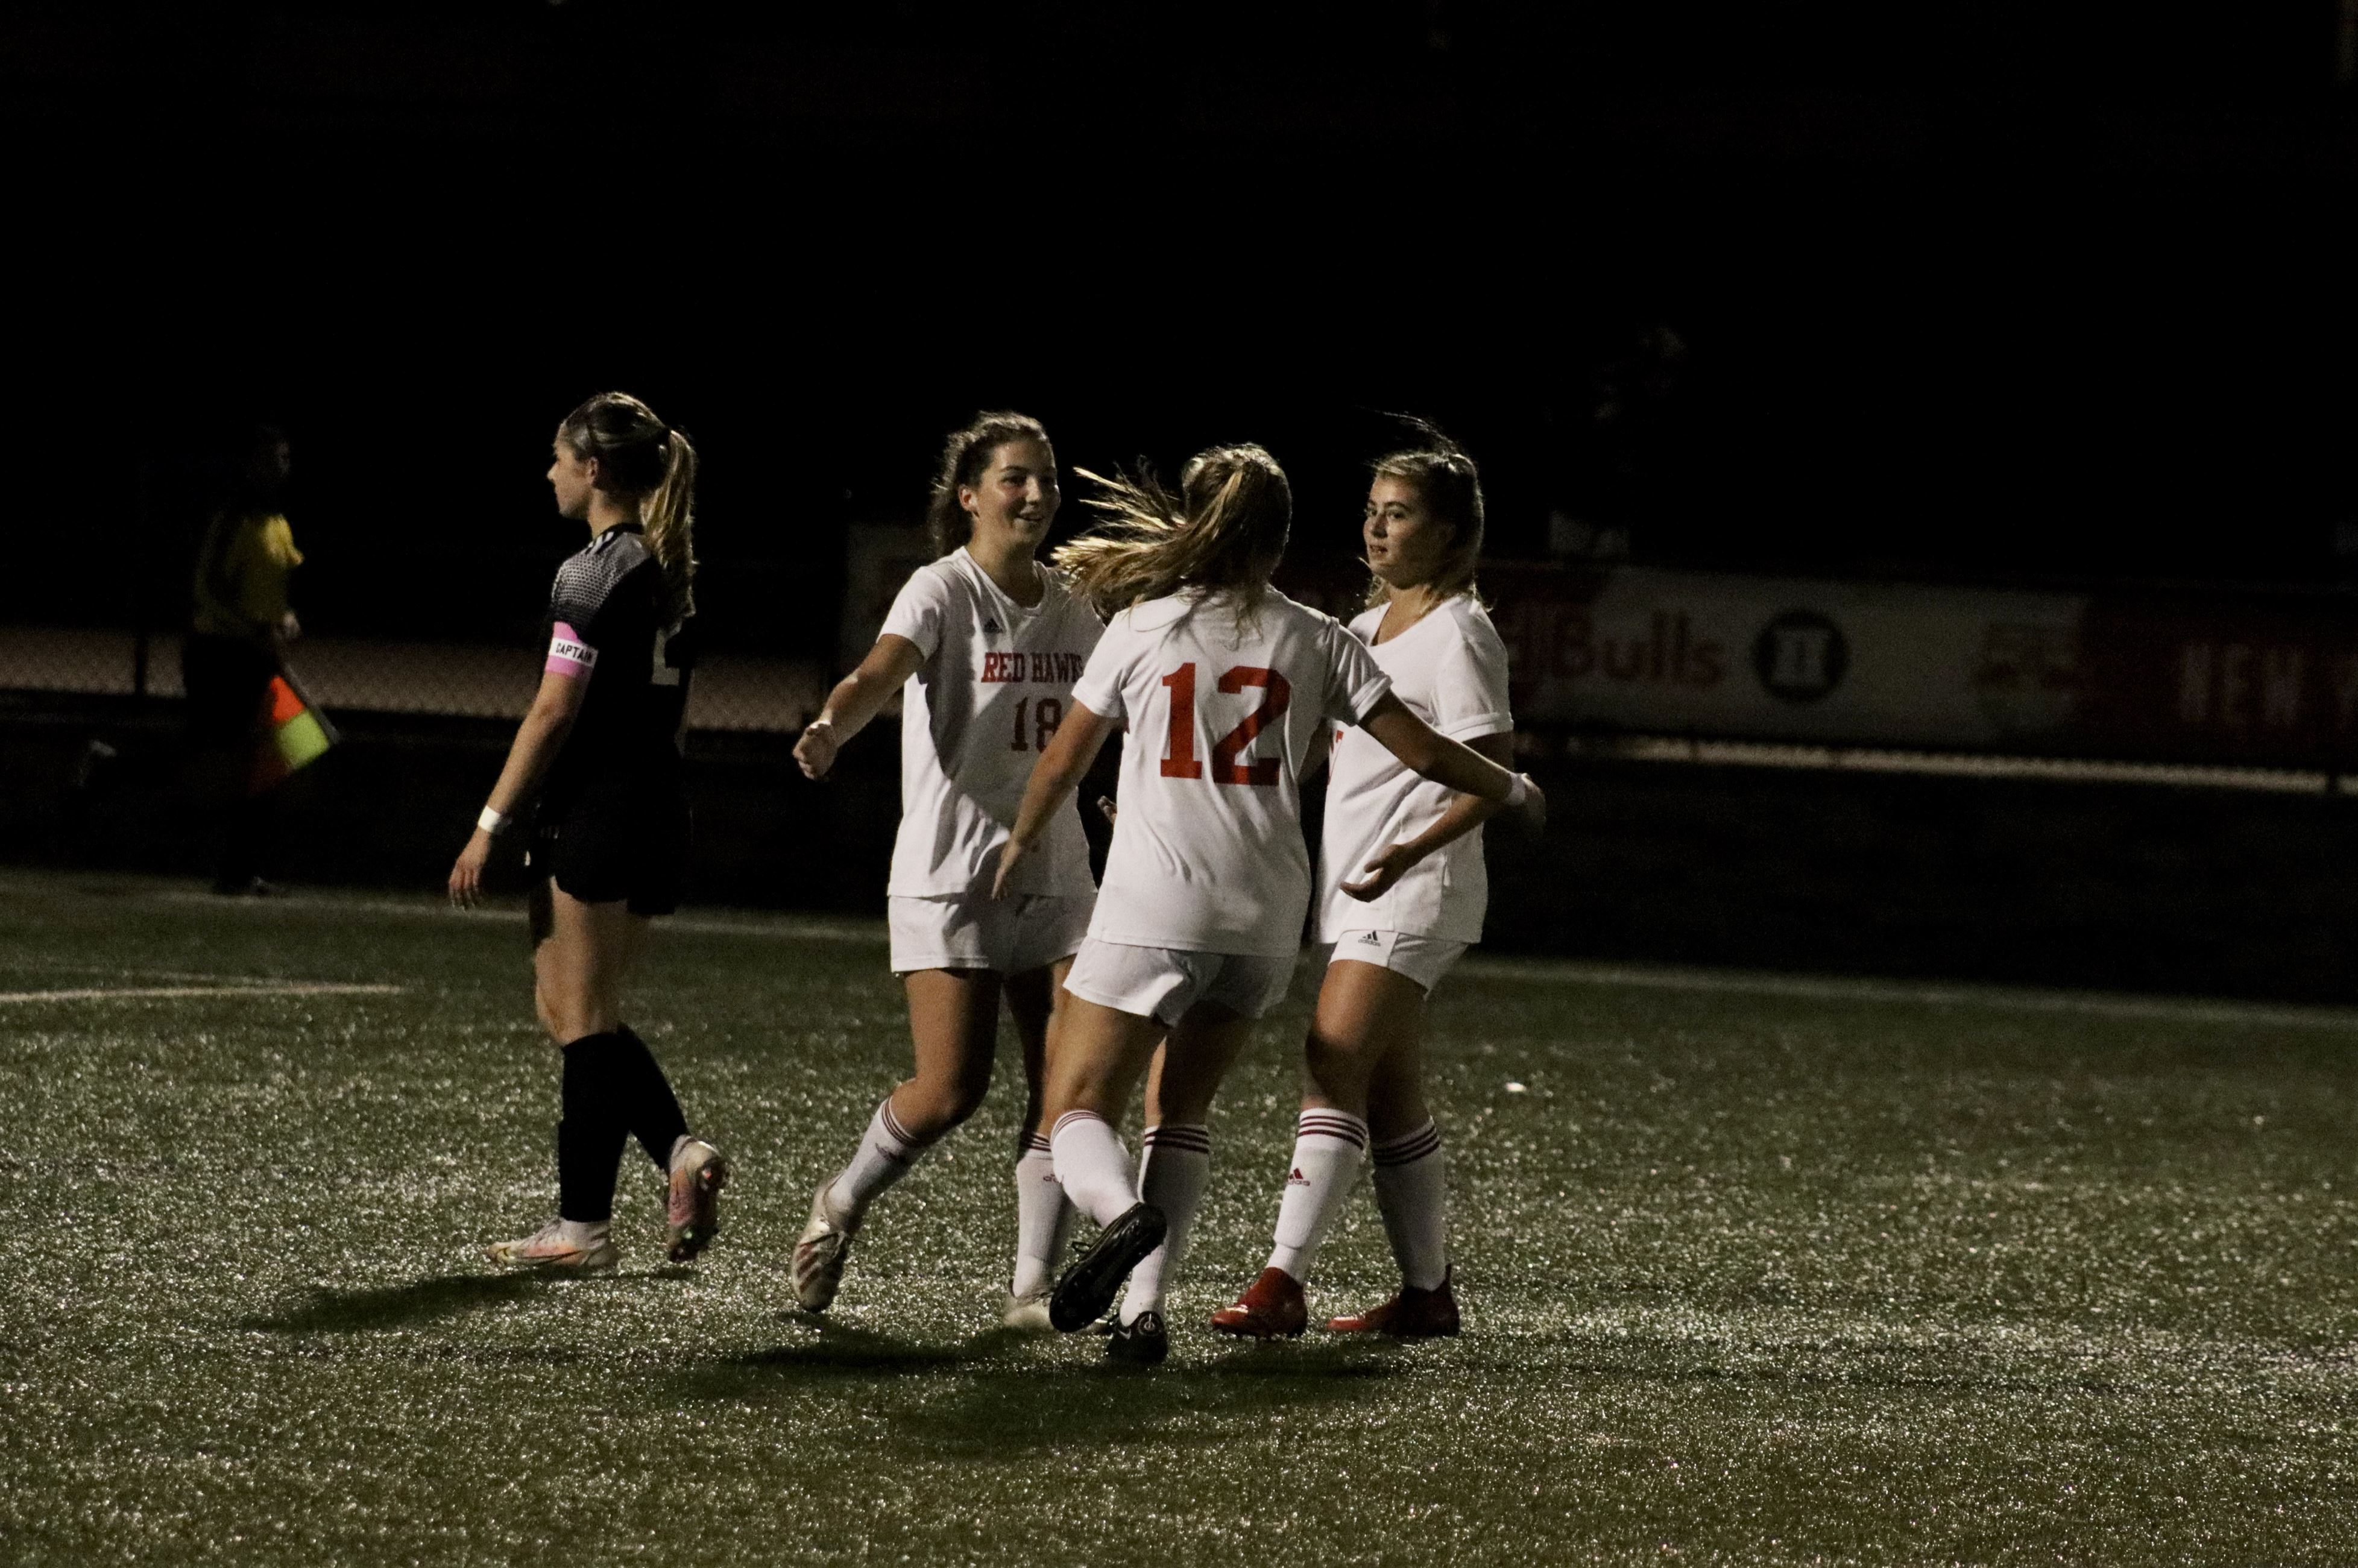 Aileen Cahill celebrates with her teammates as she scores one of her three goals of the night. Trevor Giesberg | The Montclarion